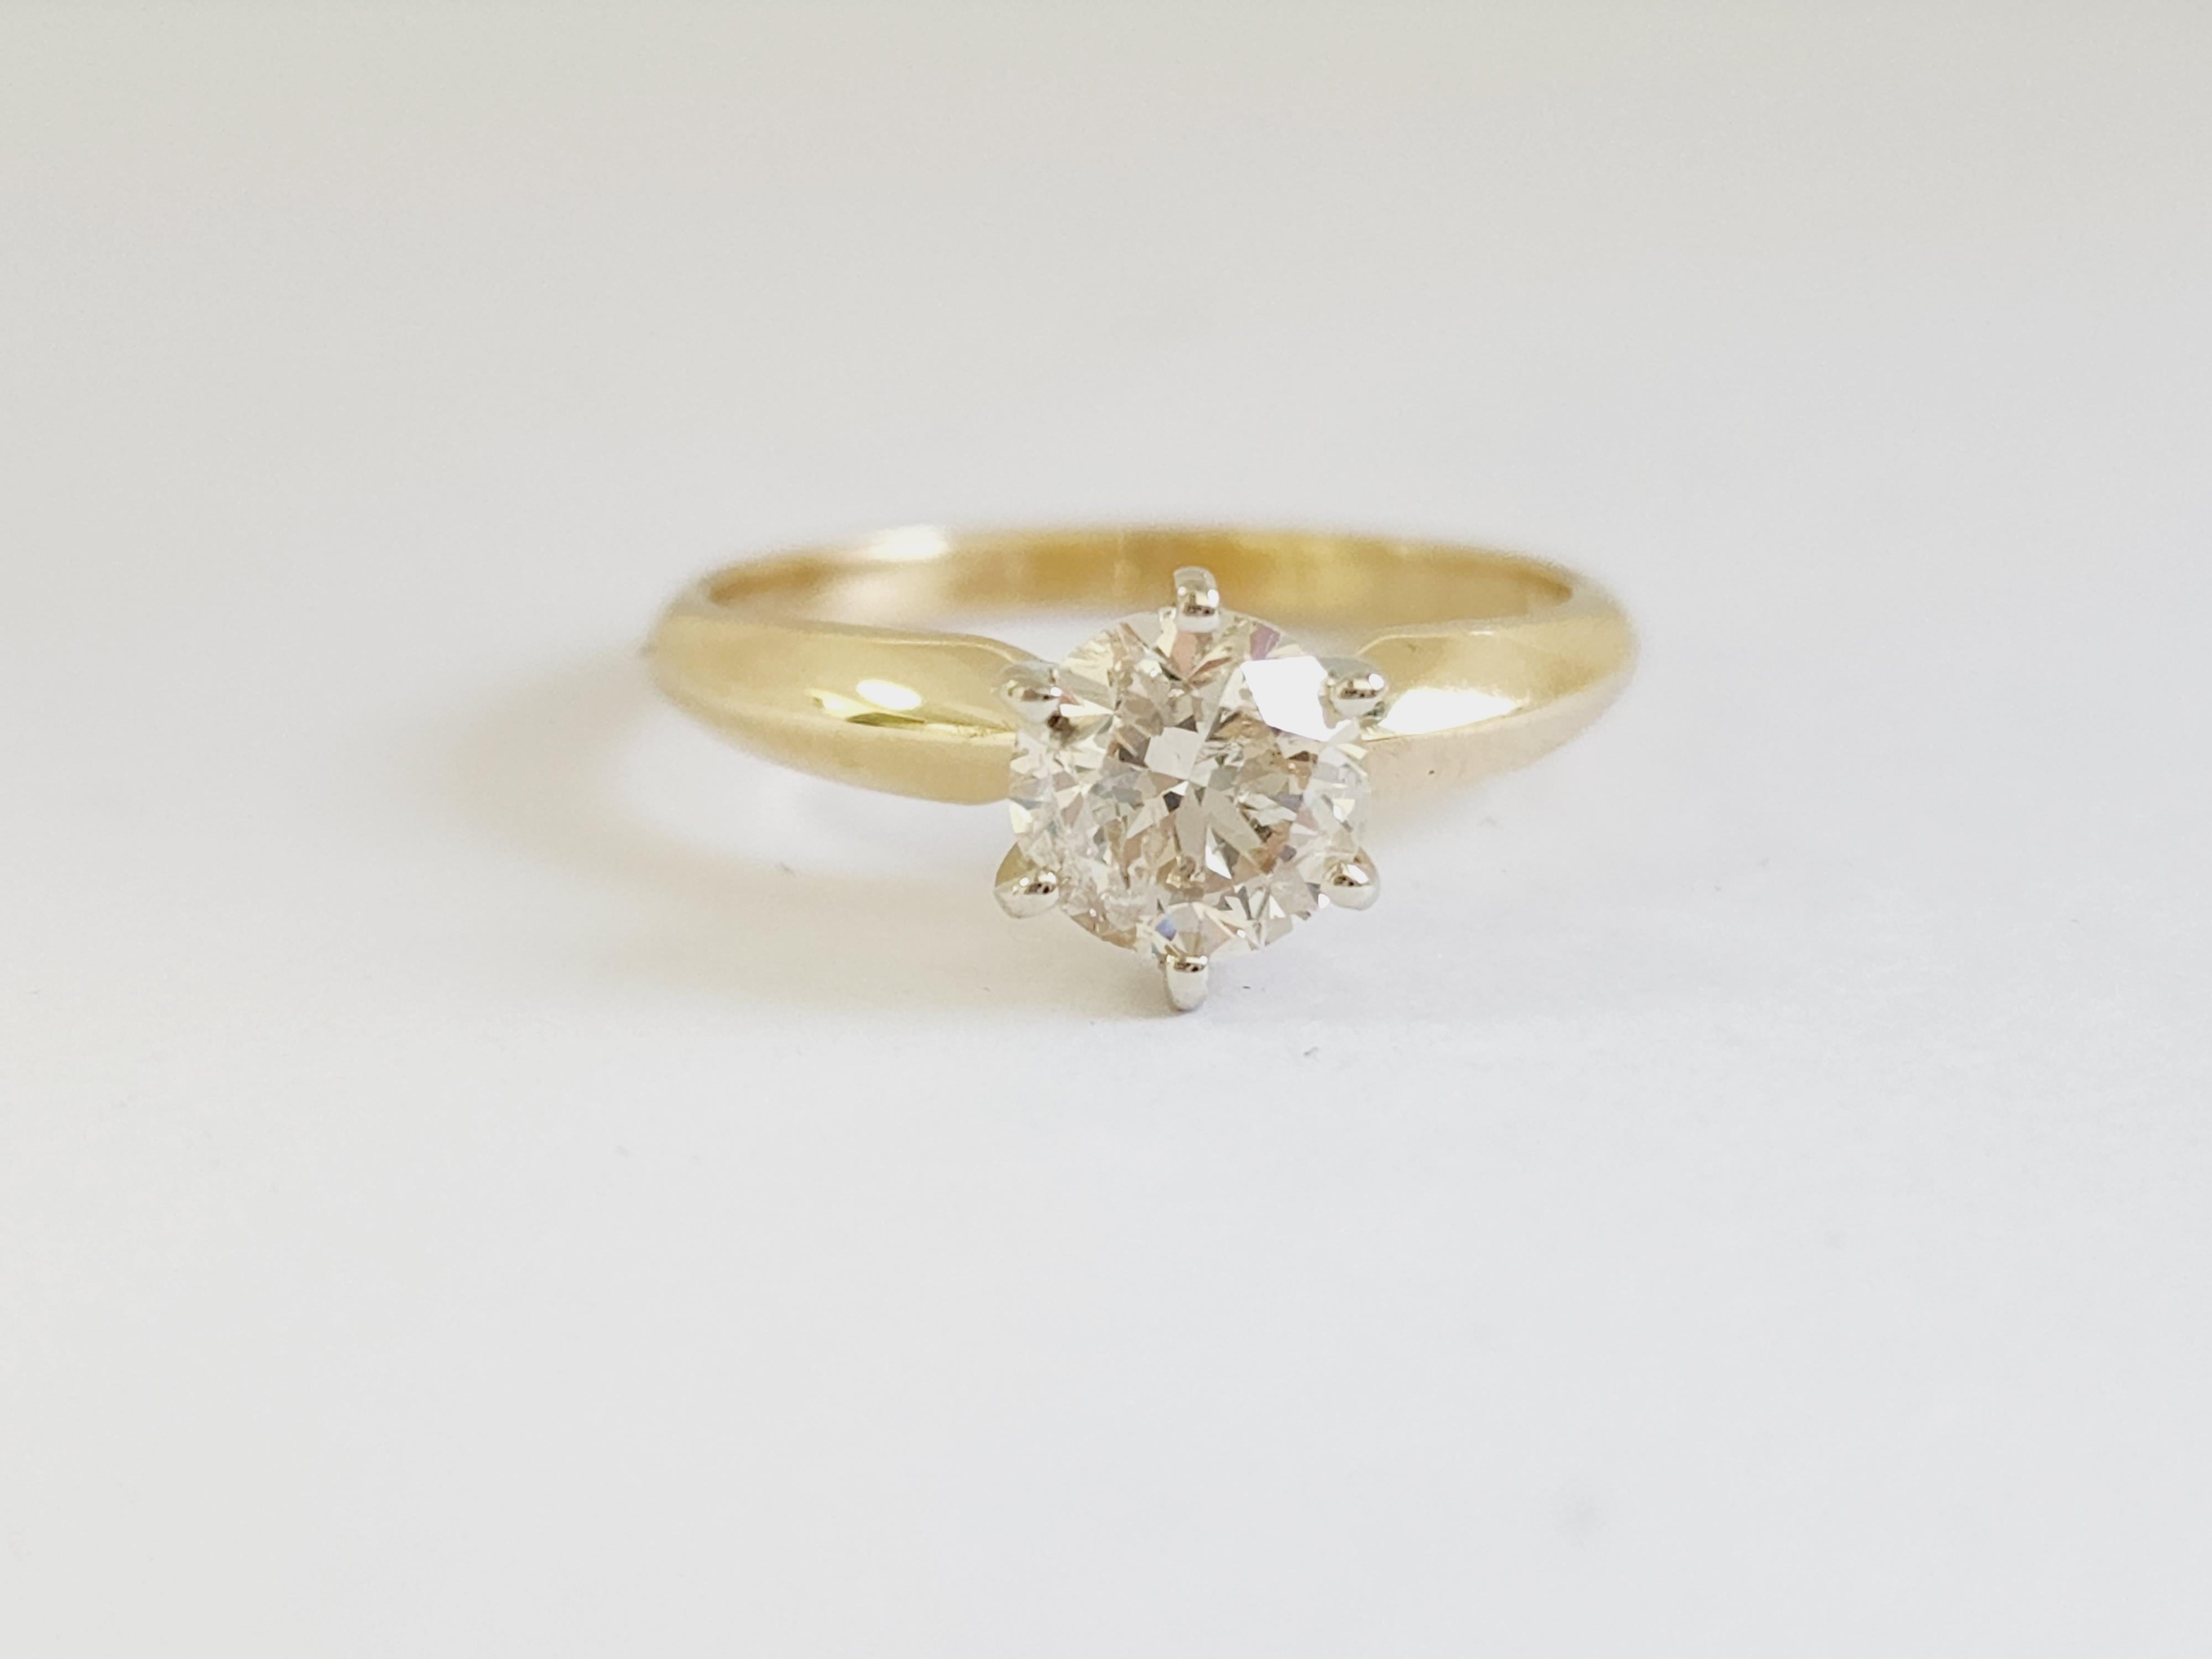 1.06 ct round brilliant cut natural diamonds. 6 prong solitaire setting, set in 14k yellow gold. Ring Size 7.